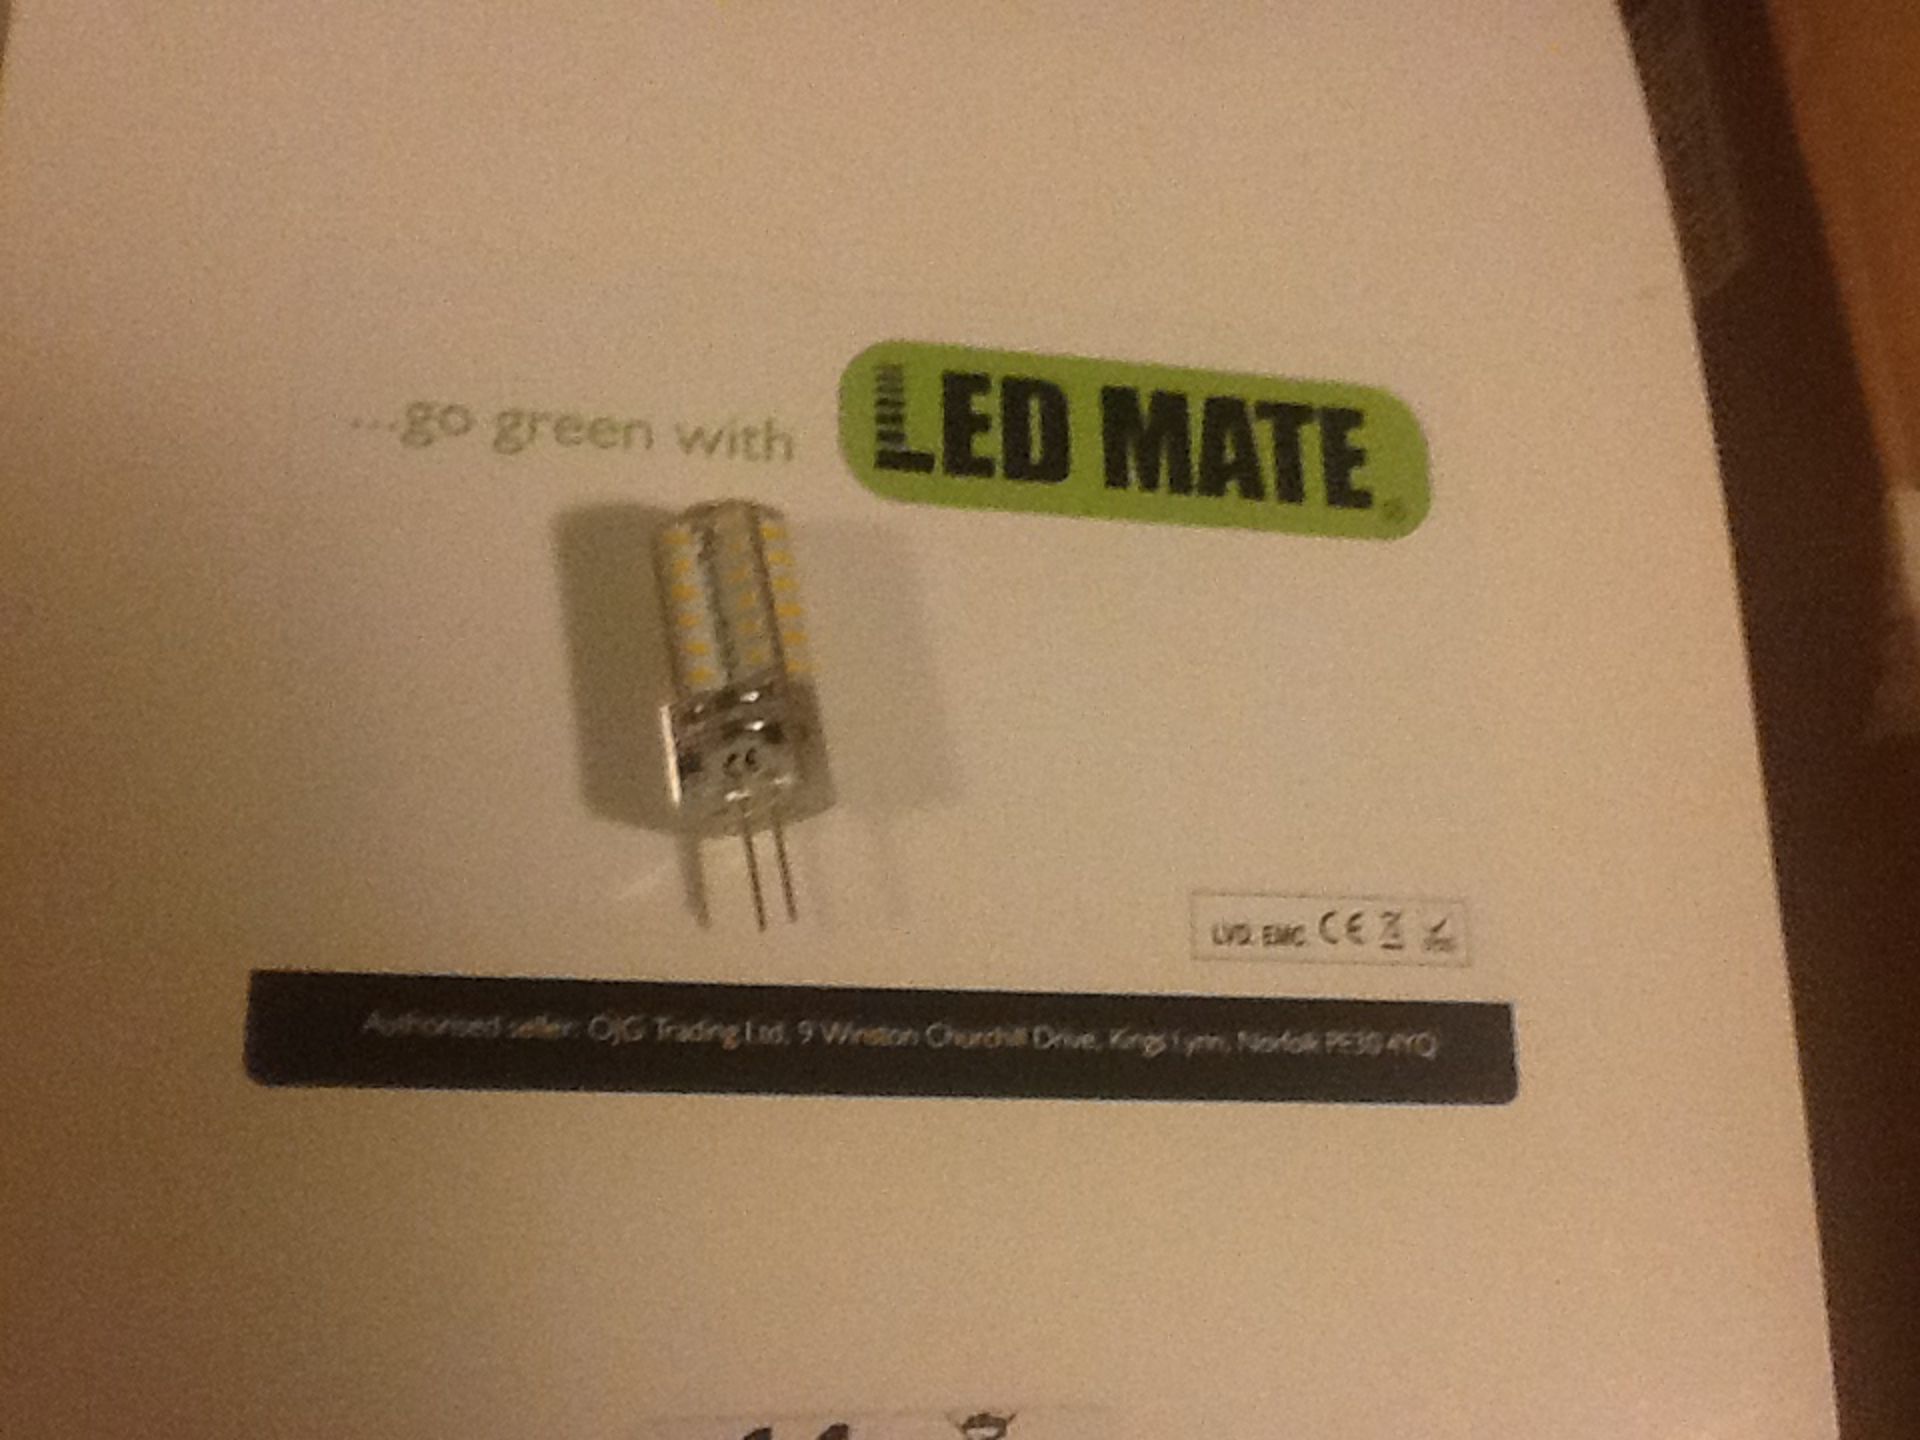 2000 LEDMATE brand G4 LED's. Each LED is individually boxed. 100 pieces in a box. 20 Boxes supplied. - Image 2 of 4